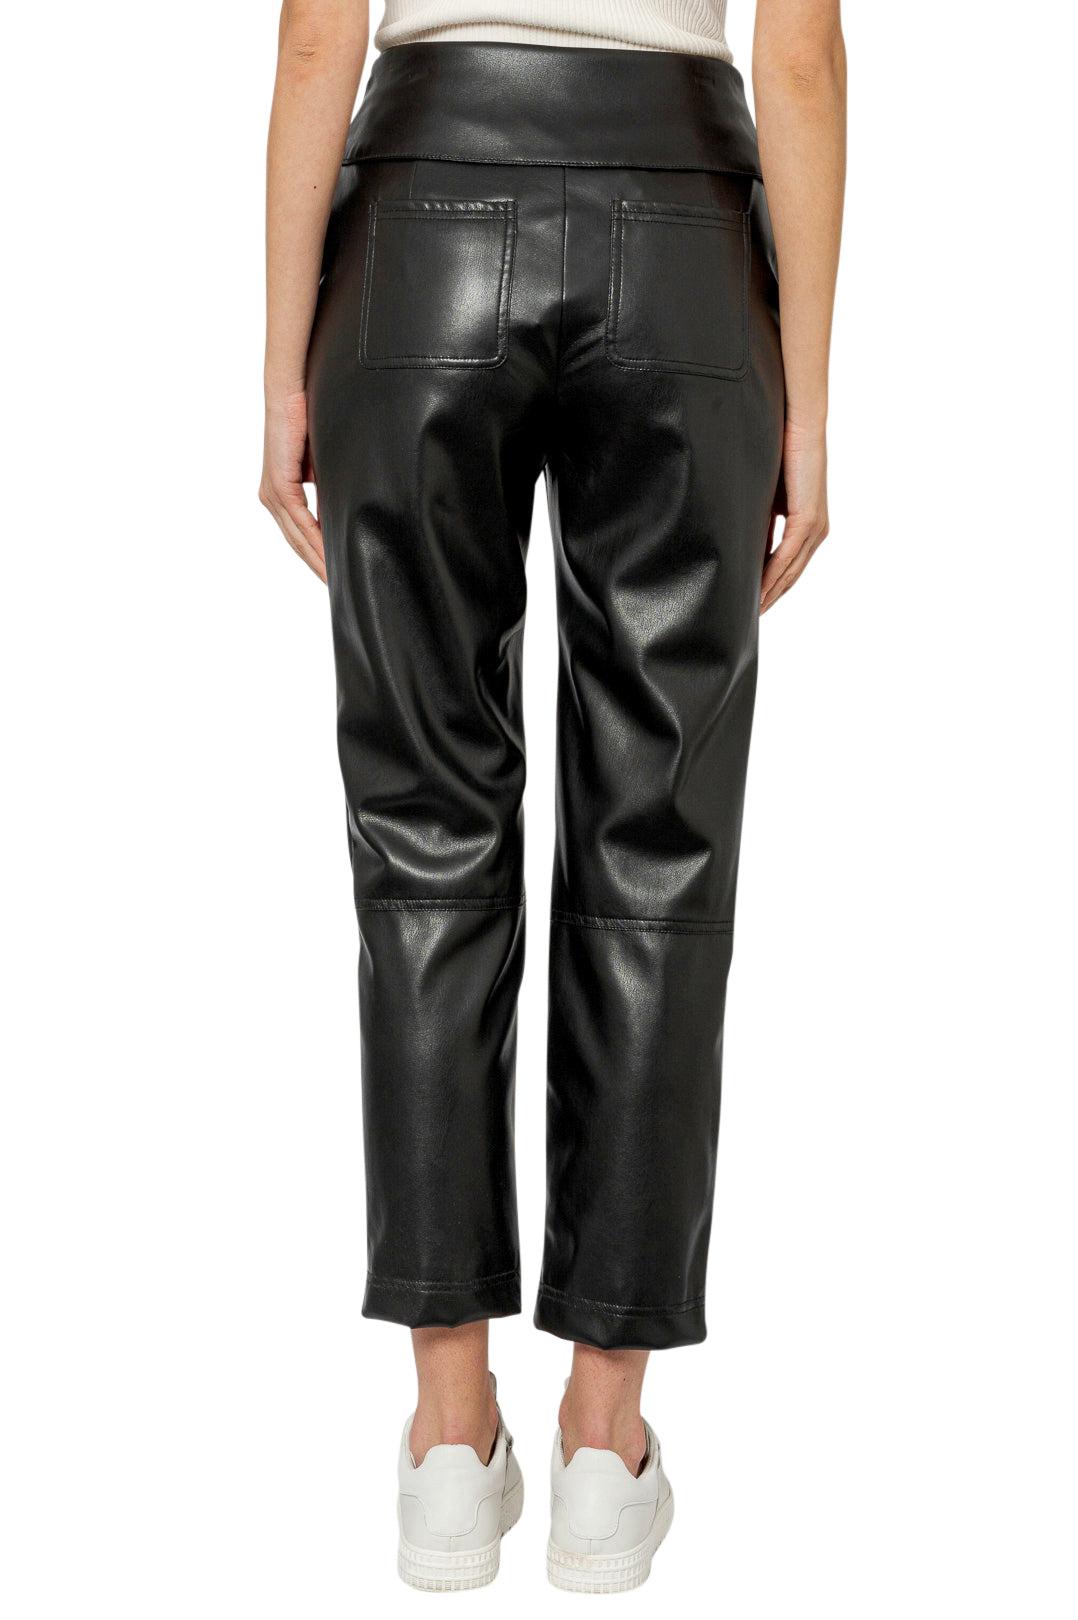 Simkhai-Eco-leather trousers-dgallerystore